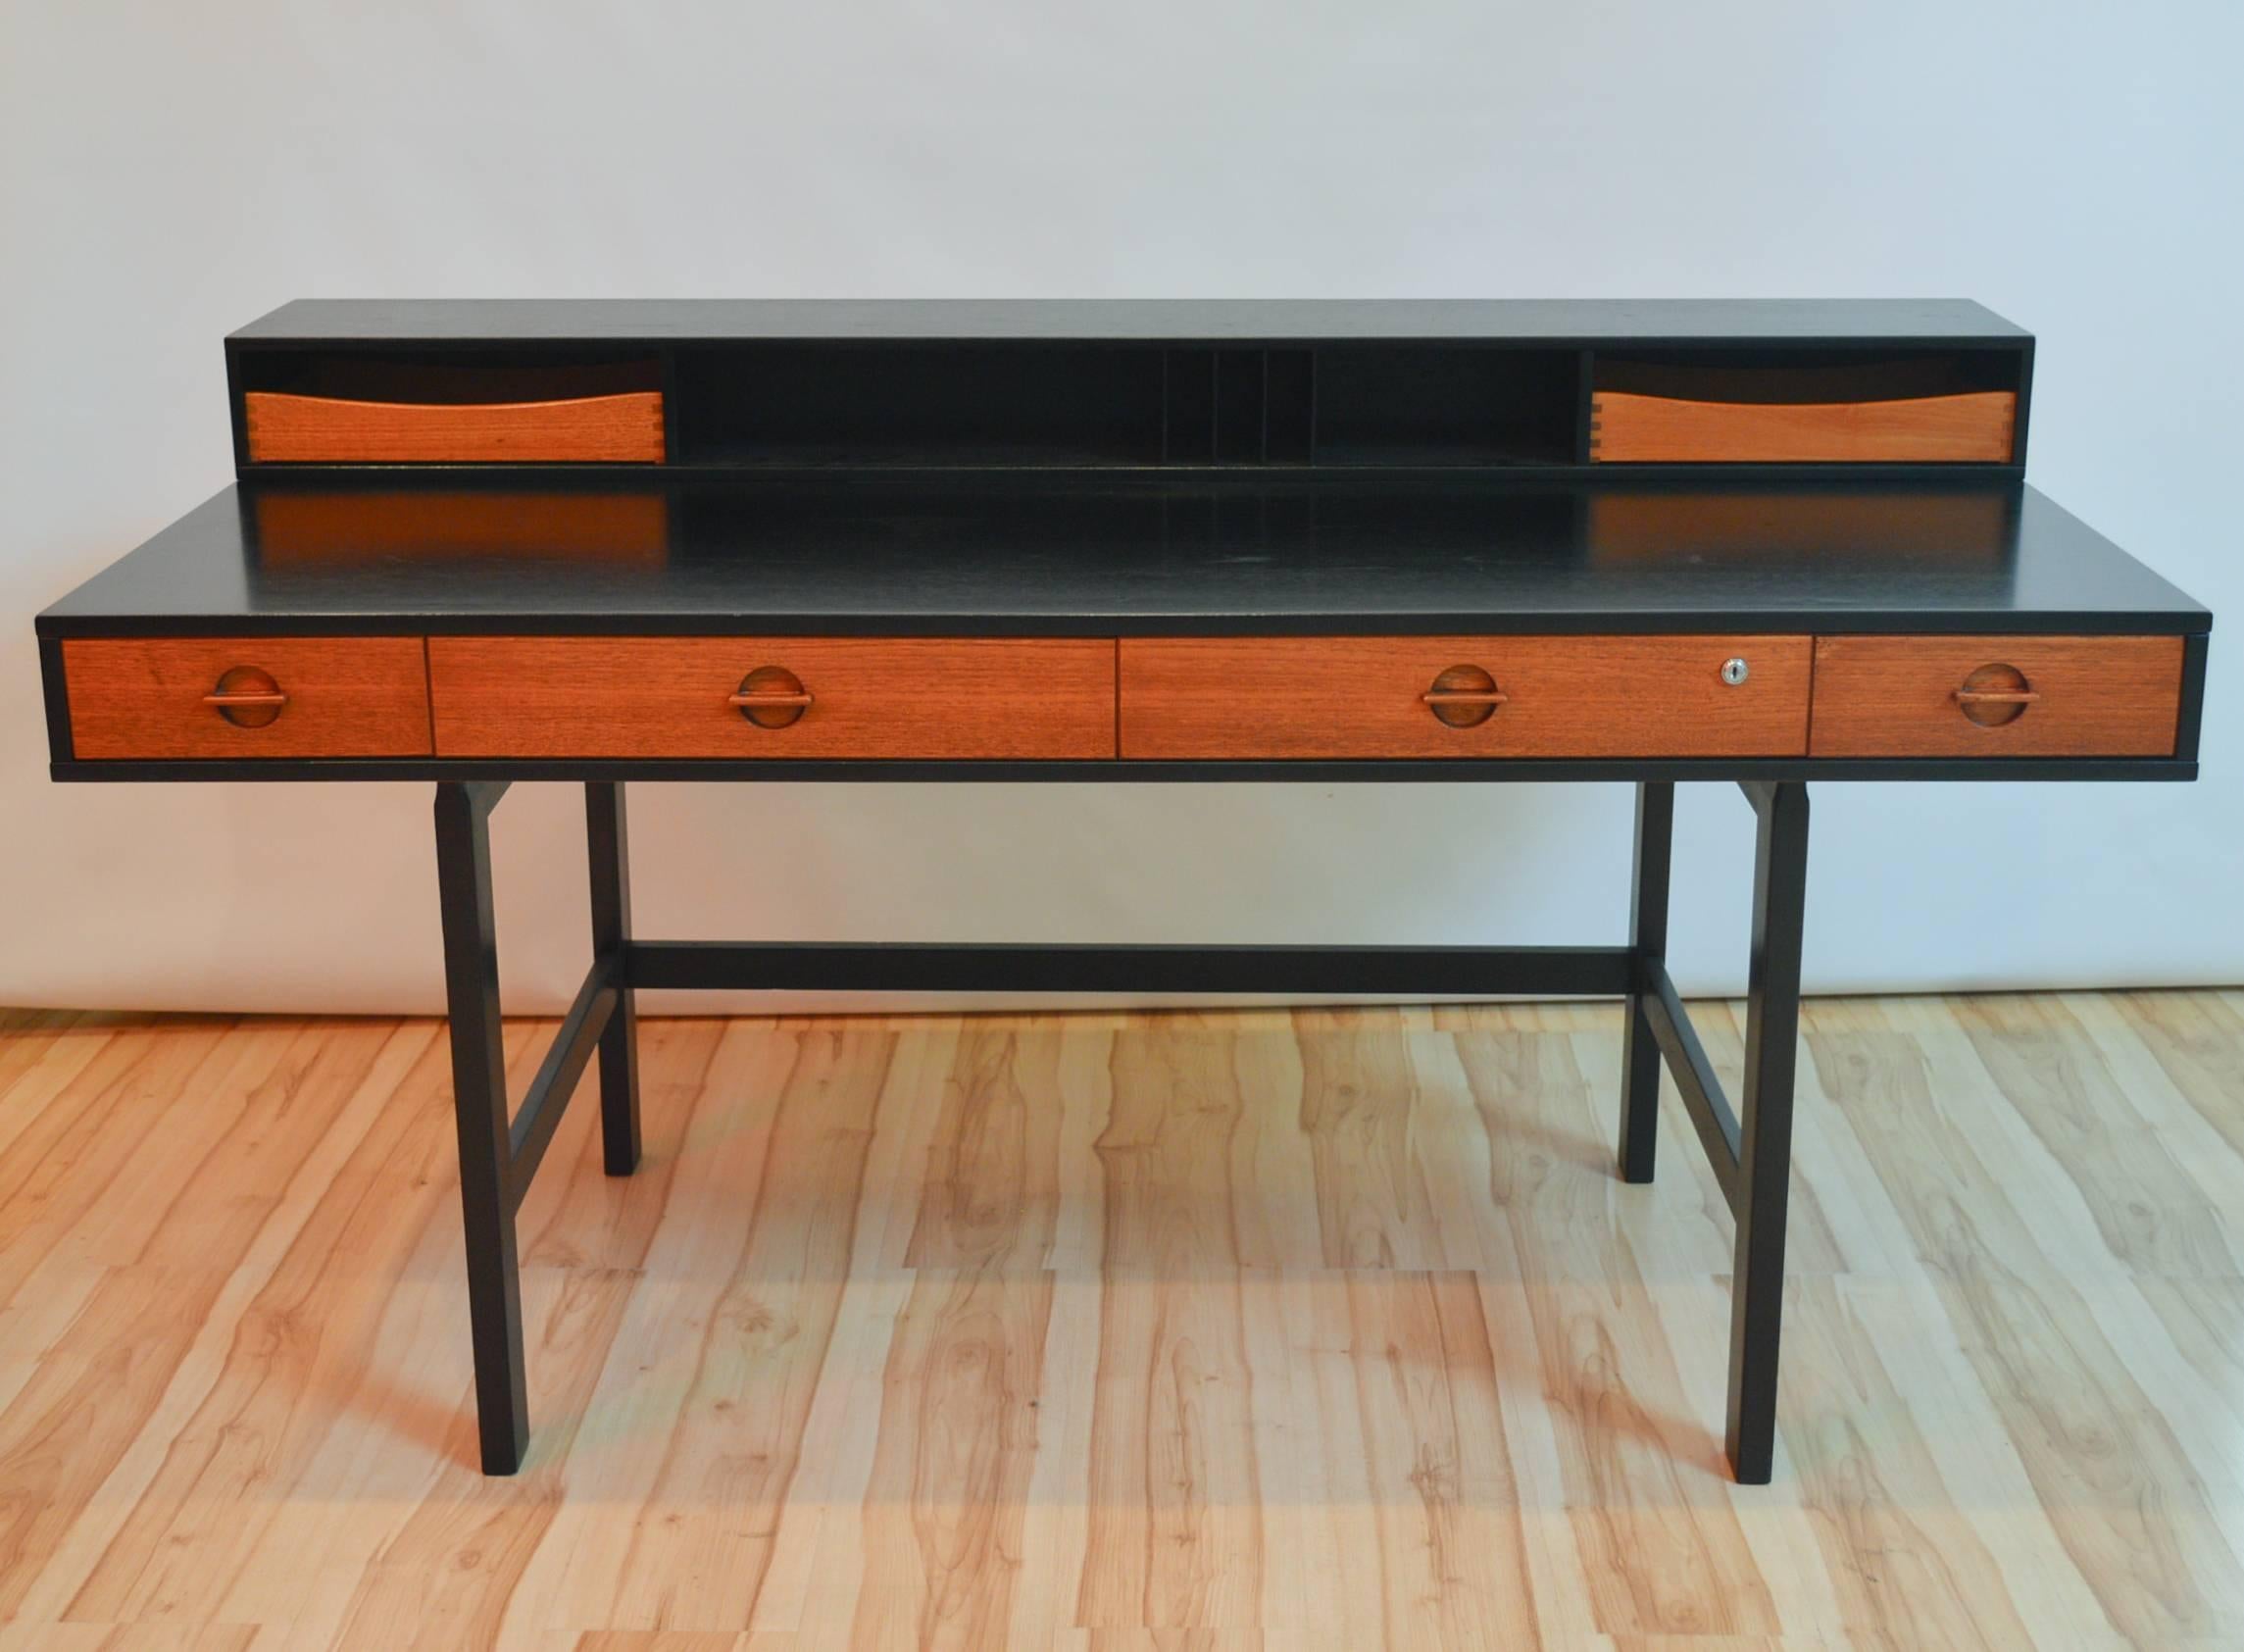 1960s Danish Modern teak flip-top partner's desk designed by Jens Quistgaard for Lovig. The secretary shelf flips down to create a larger workspace. This piece has been professionally refinished and refurbished - the body of the desk has been